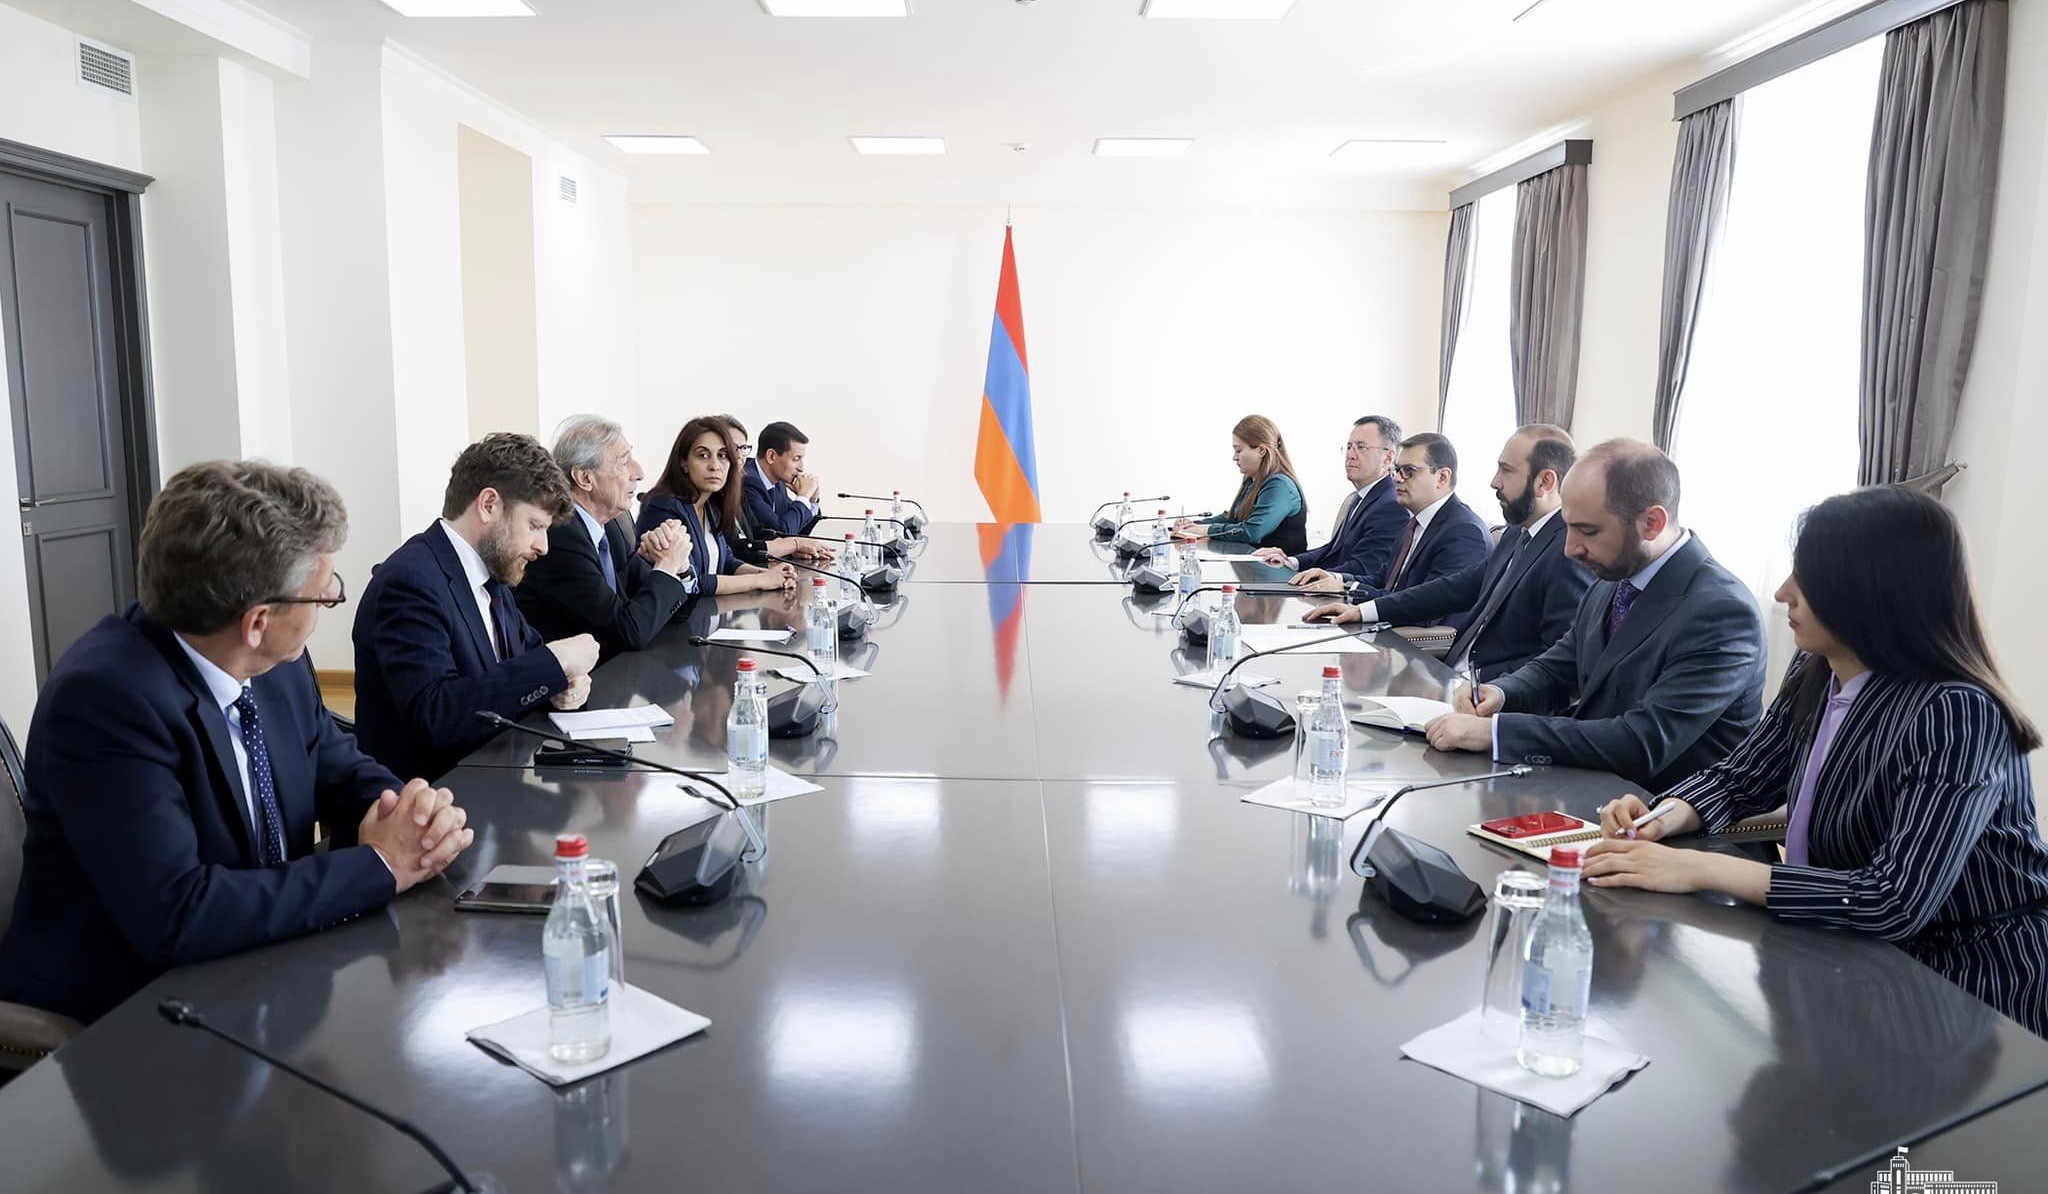 Meeting of Minister of Foreign Affairs of Armenia with President of Hauts-de-Seine of France